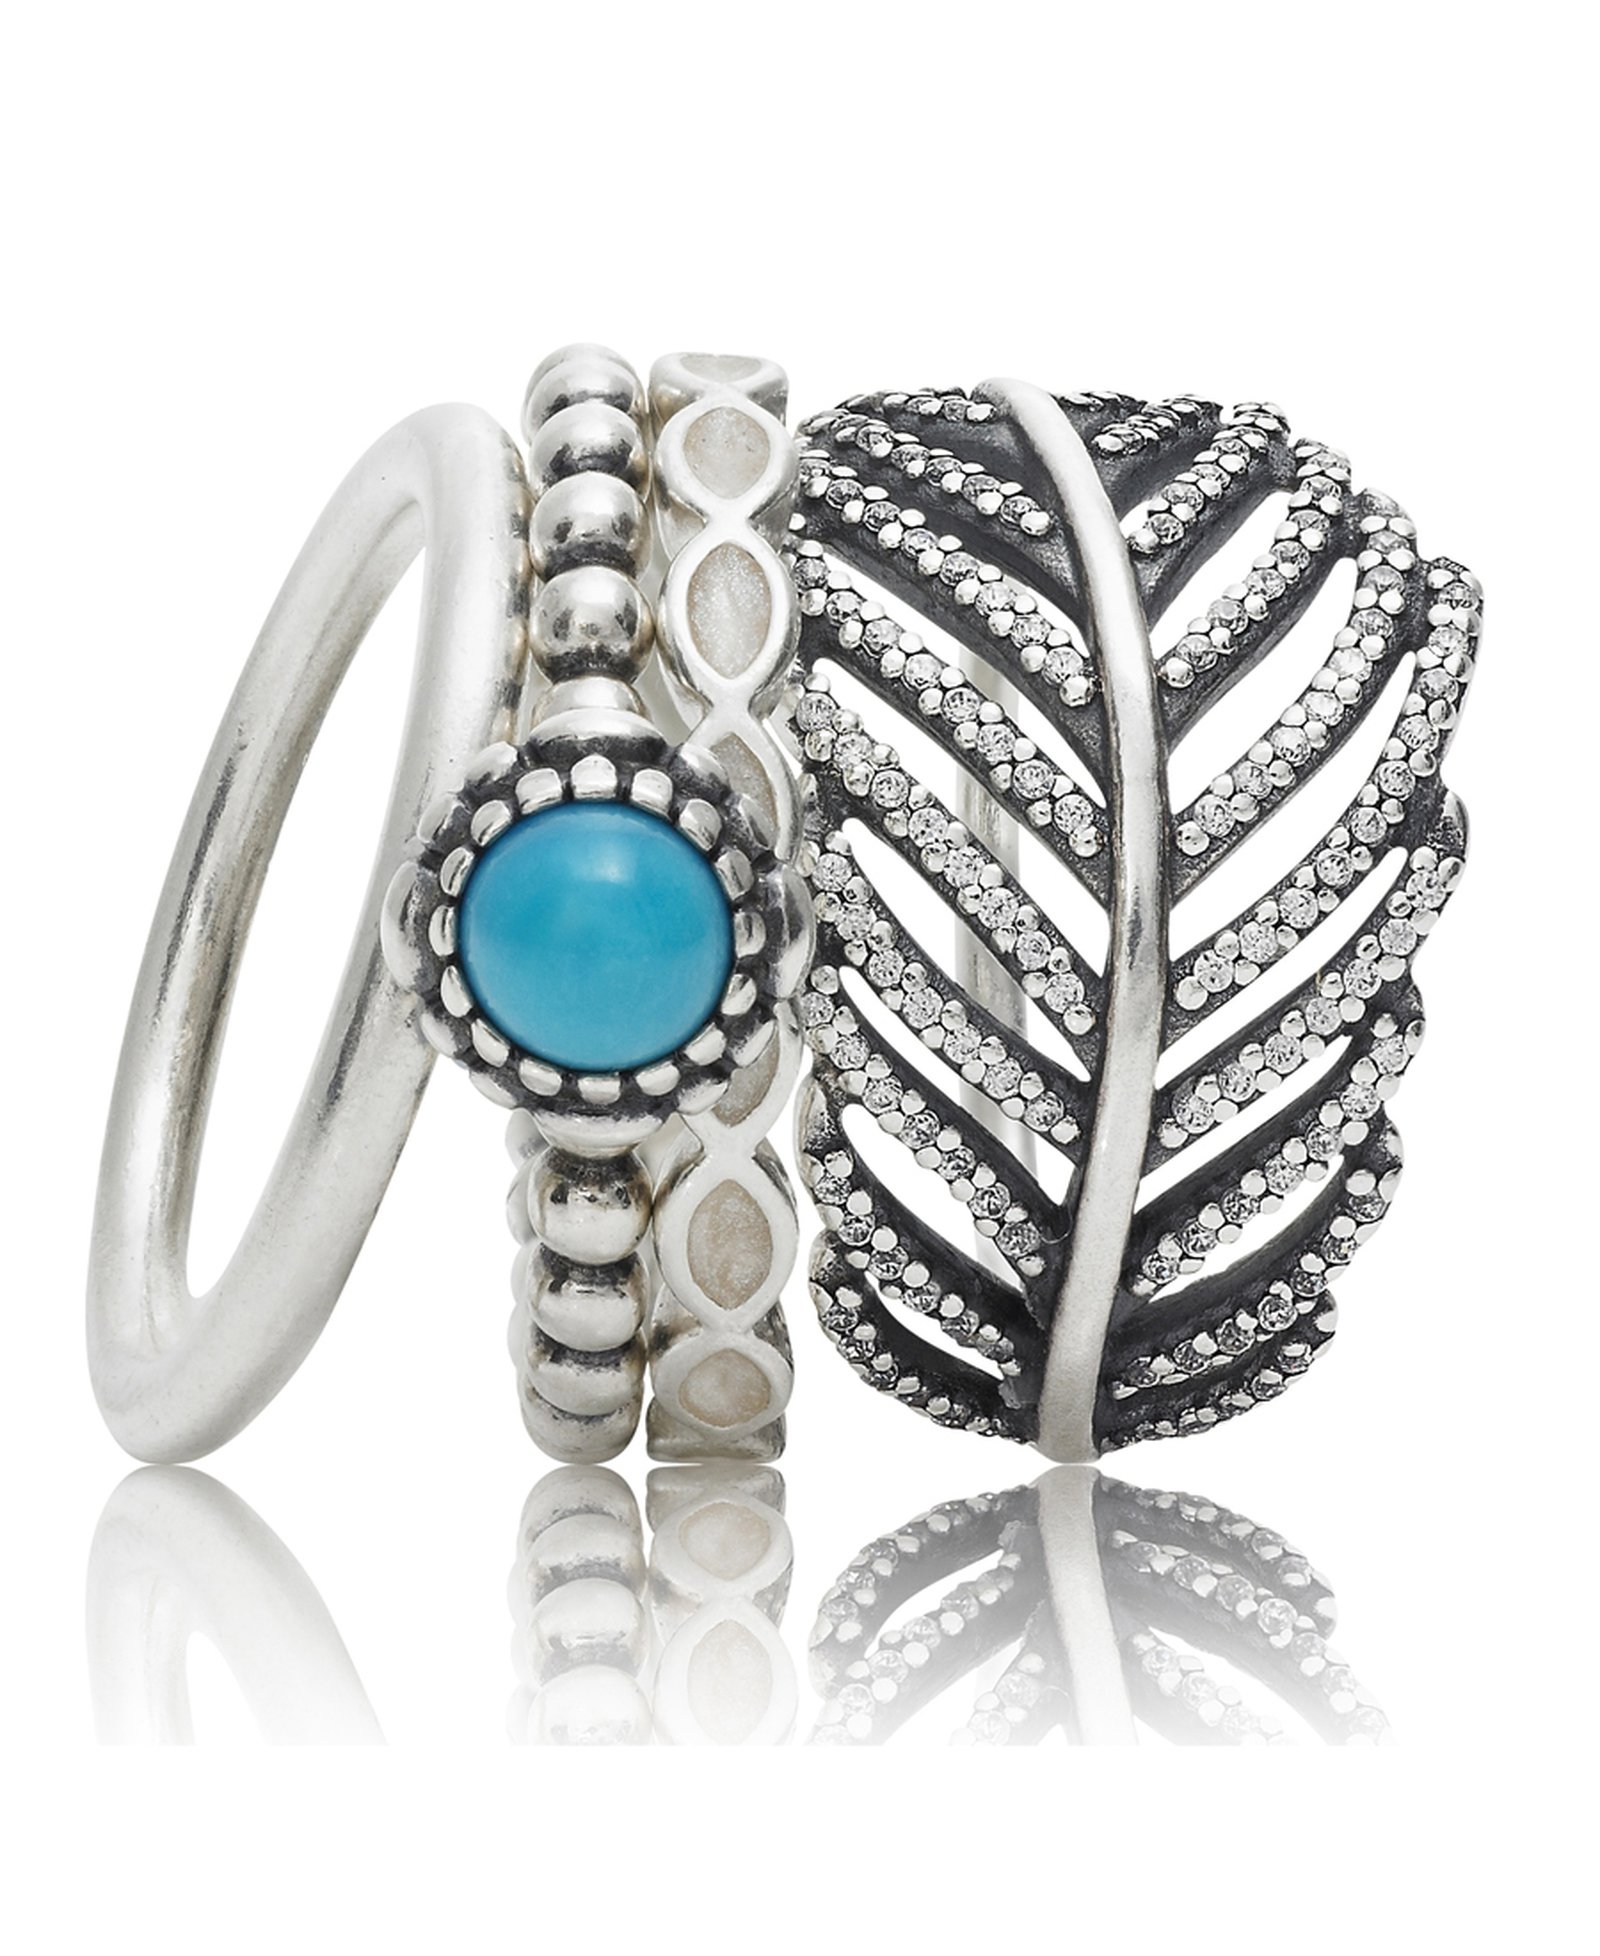 Pandora launches 3 for 2 rings offer